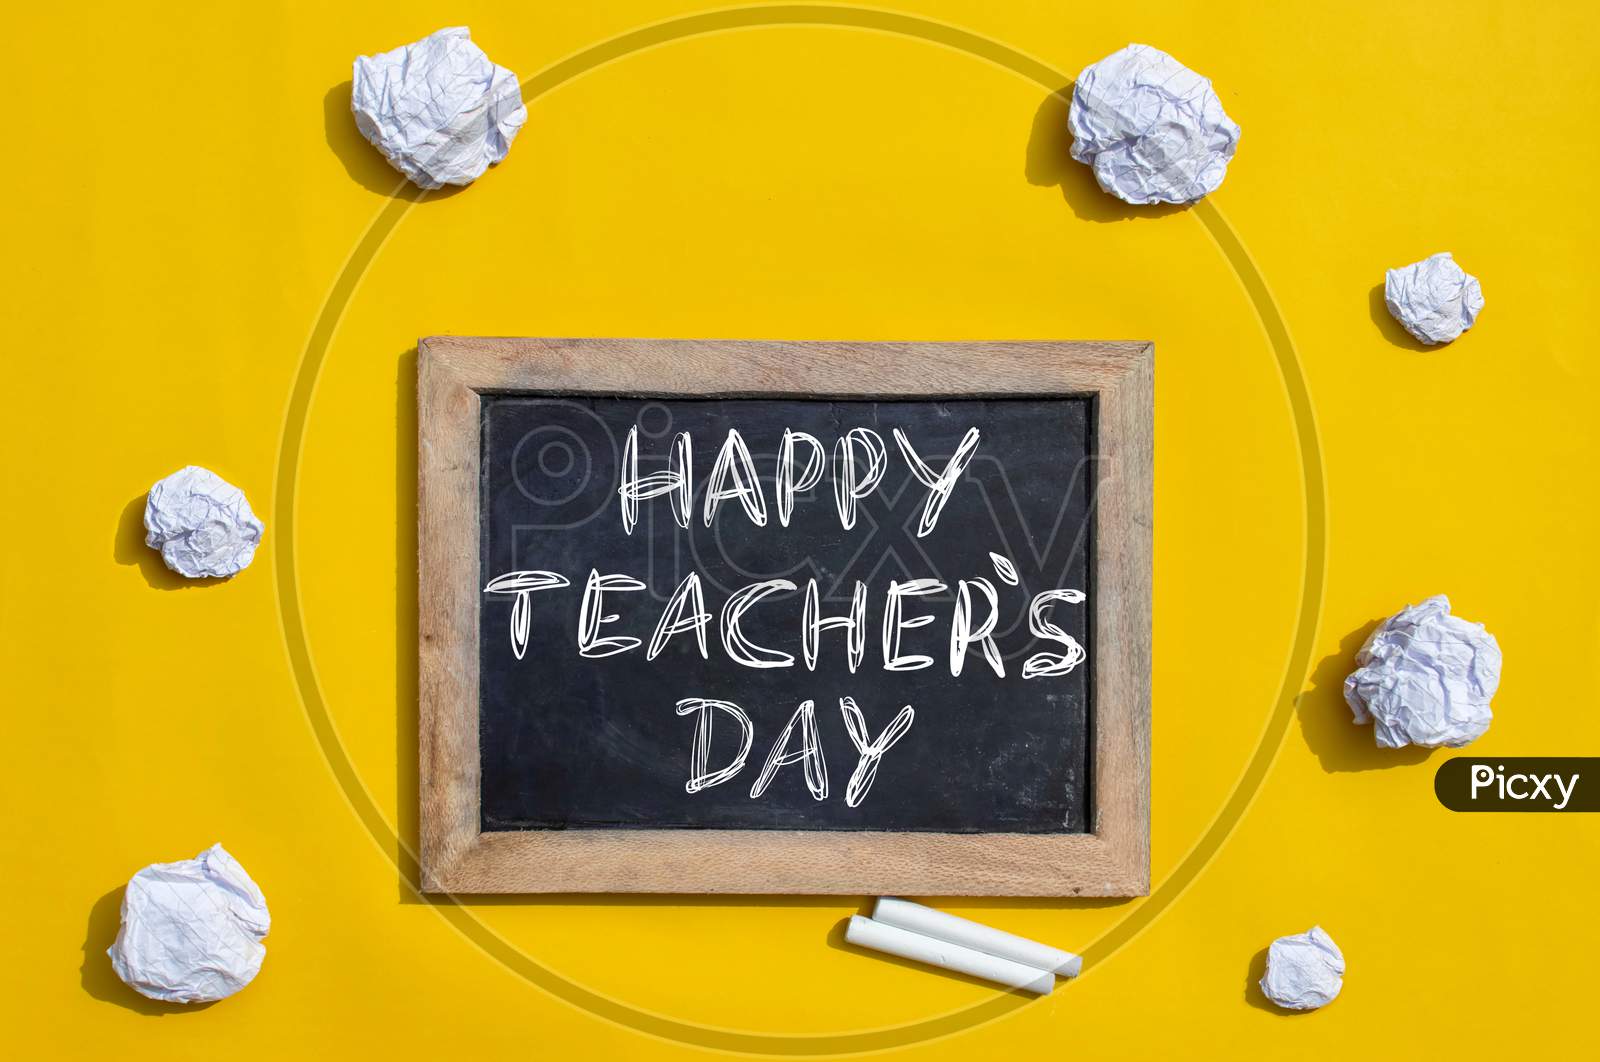 Happy Teacher's Day Creative Photo With Slate Board And Crumpled Paper Balls, Perfect For Wallpaper